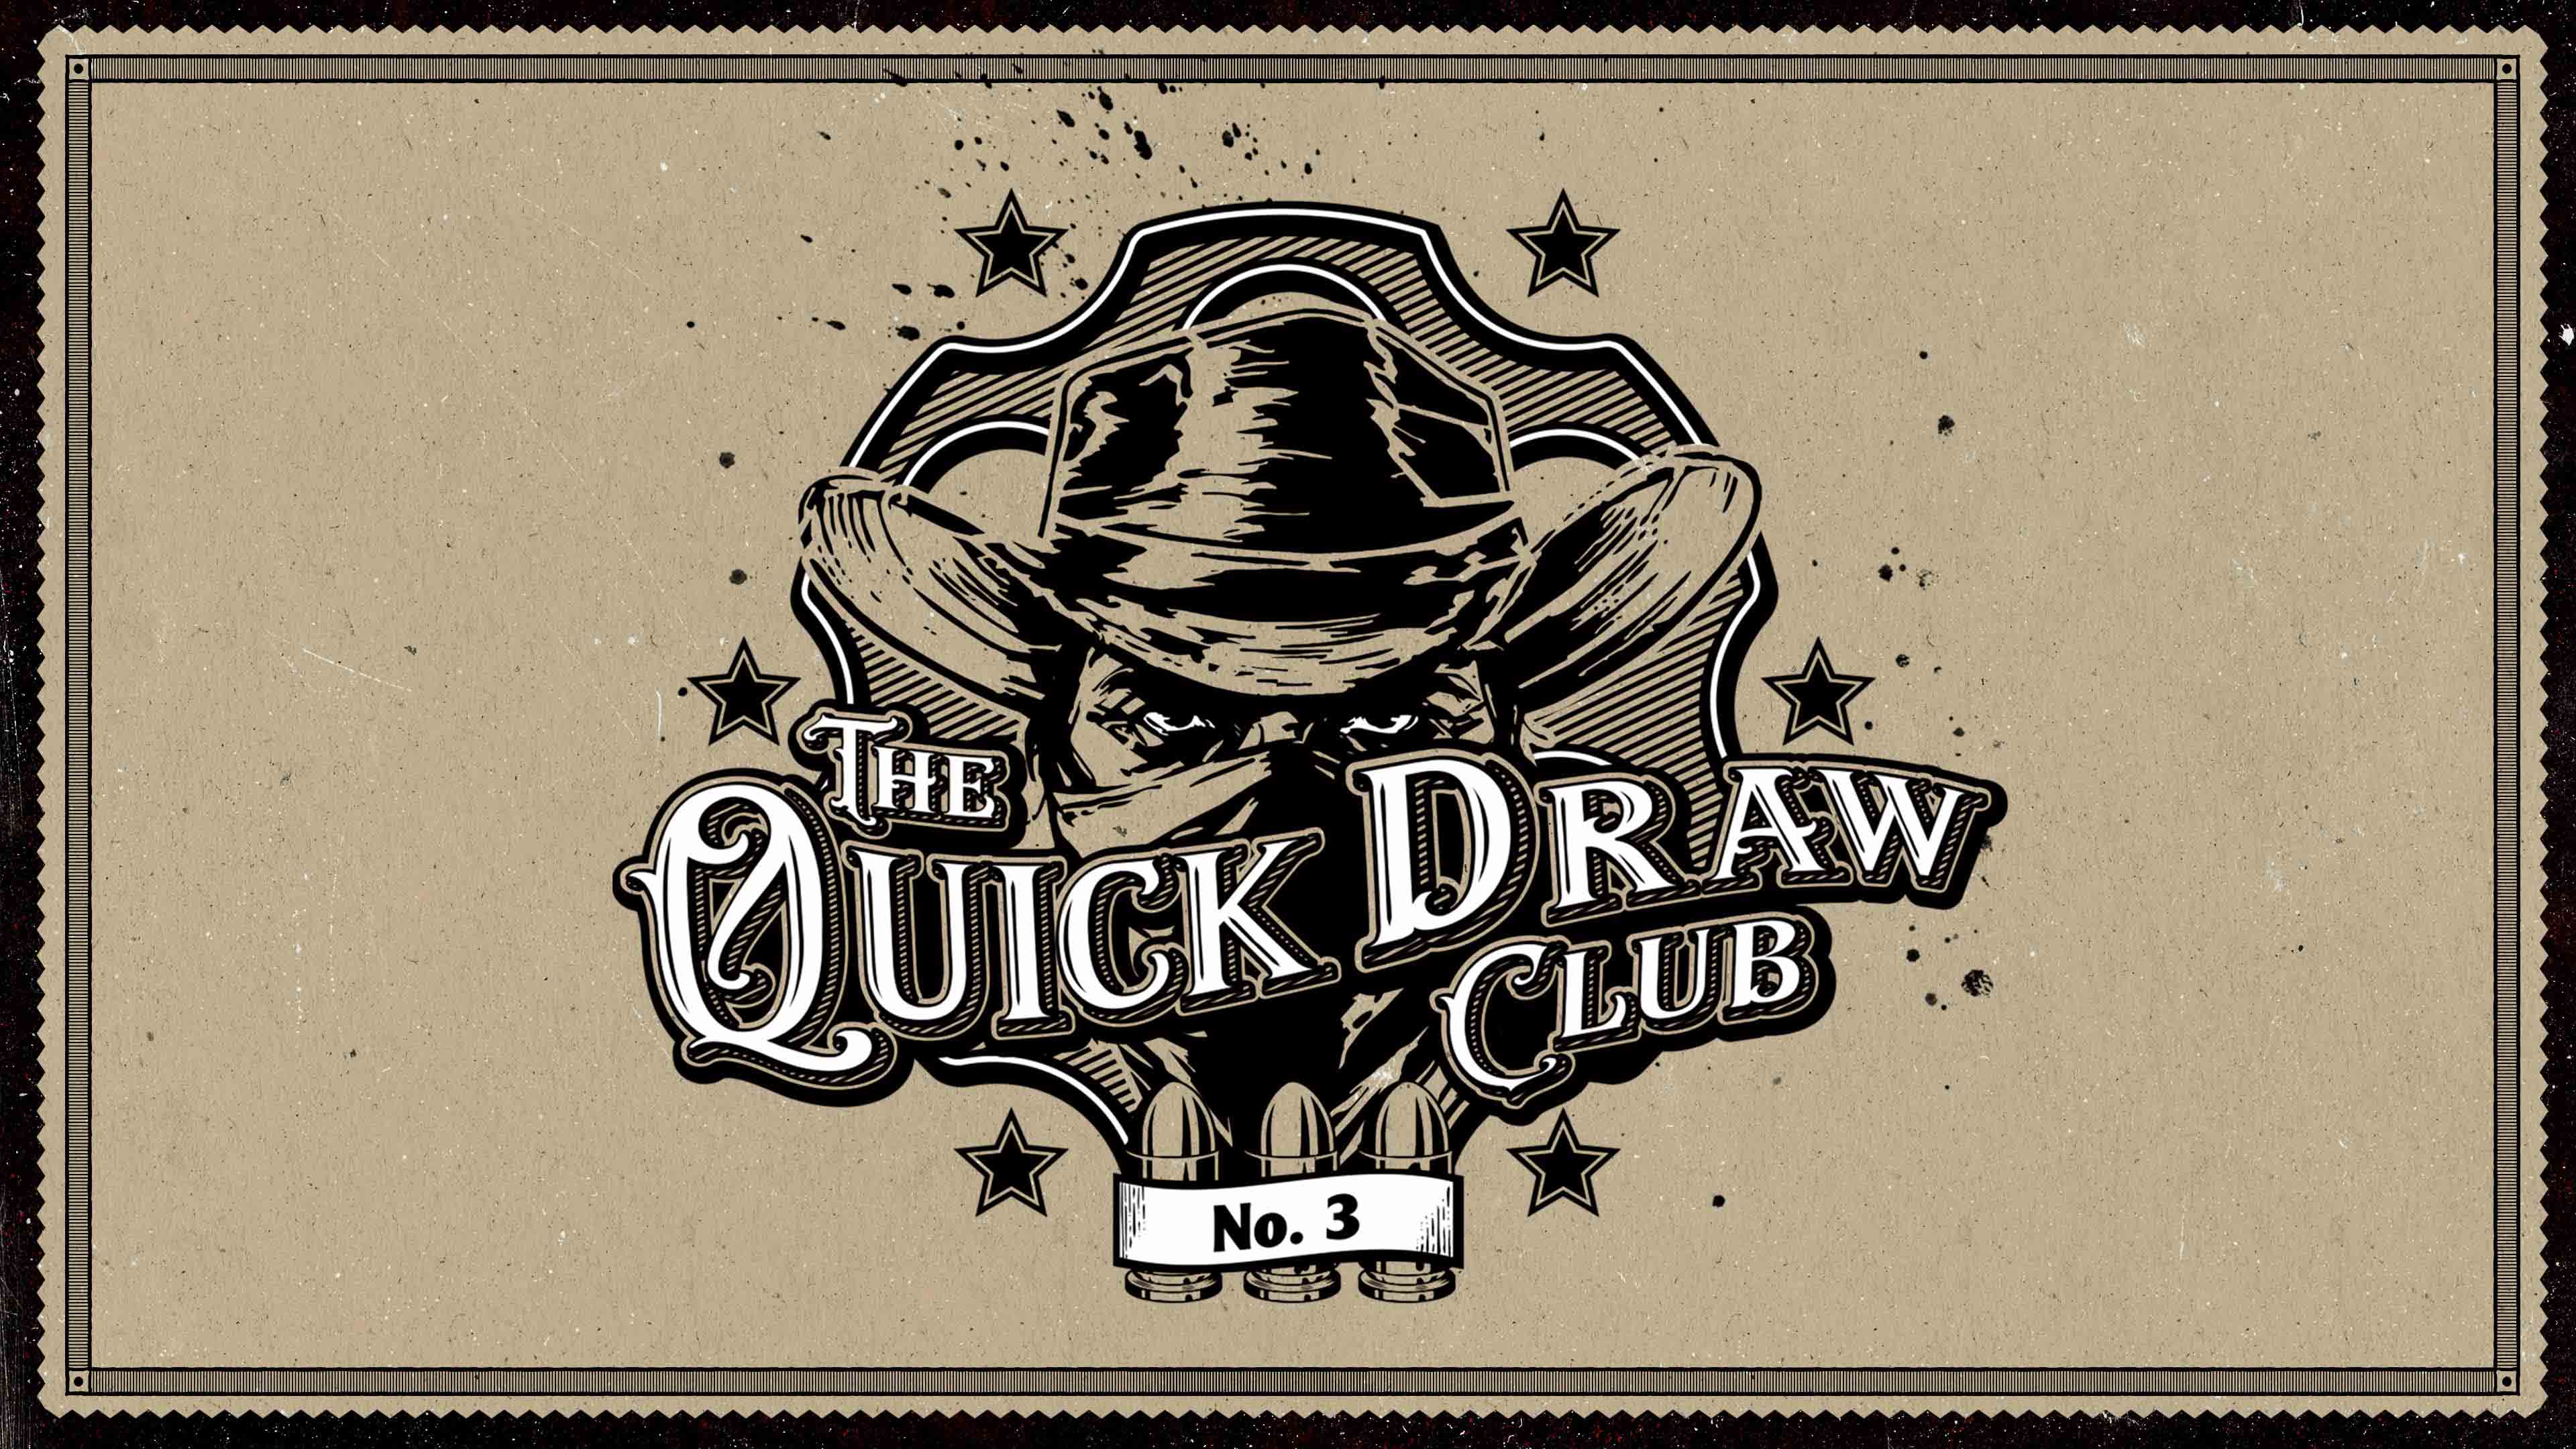 Quick Draw Wallpapers